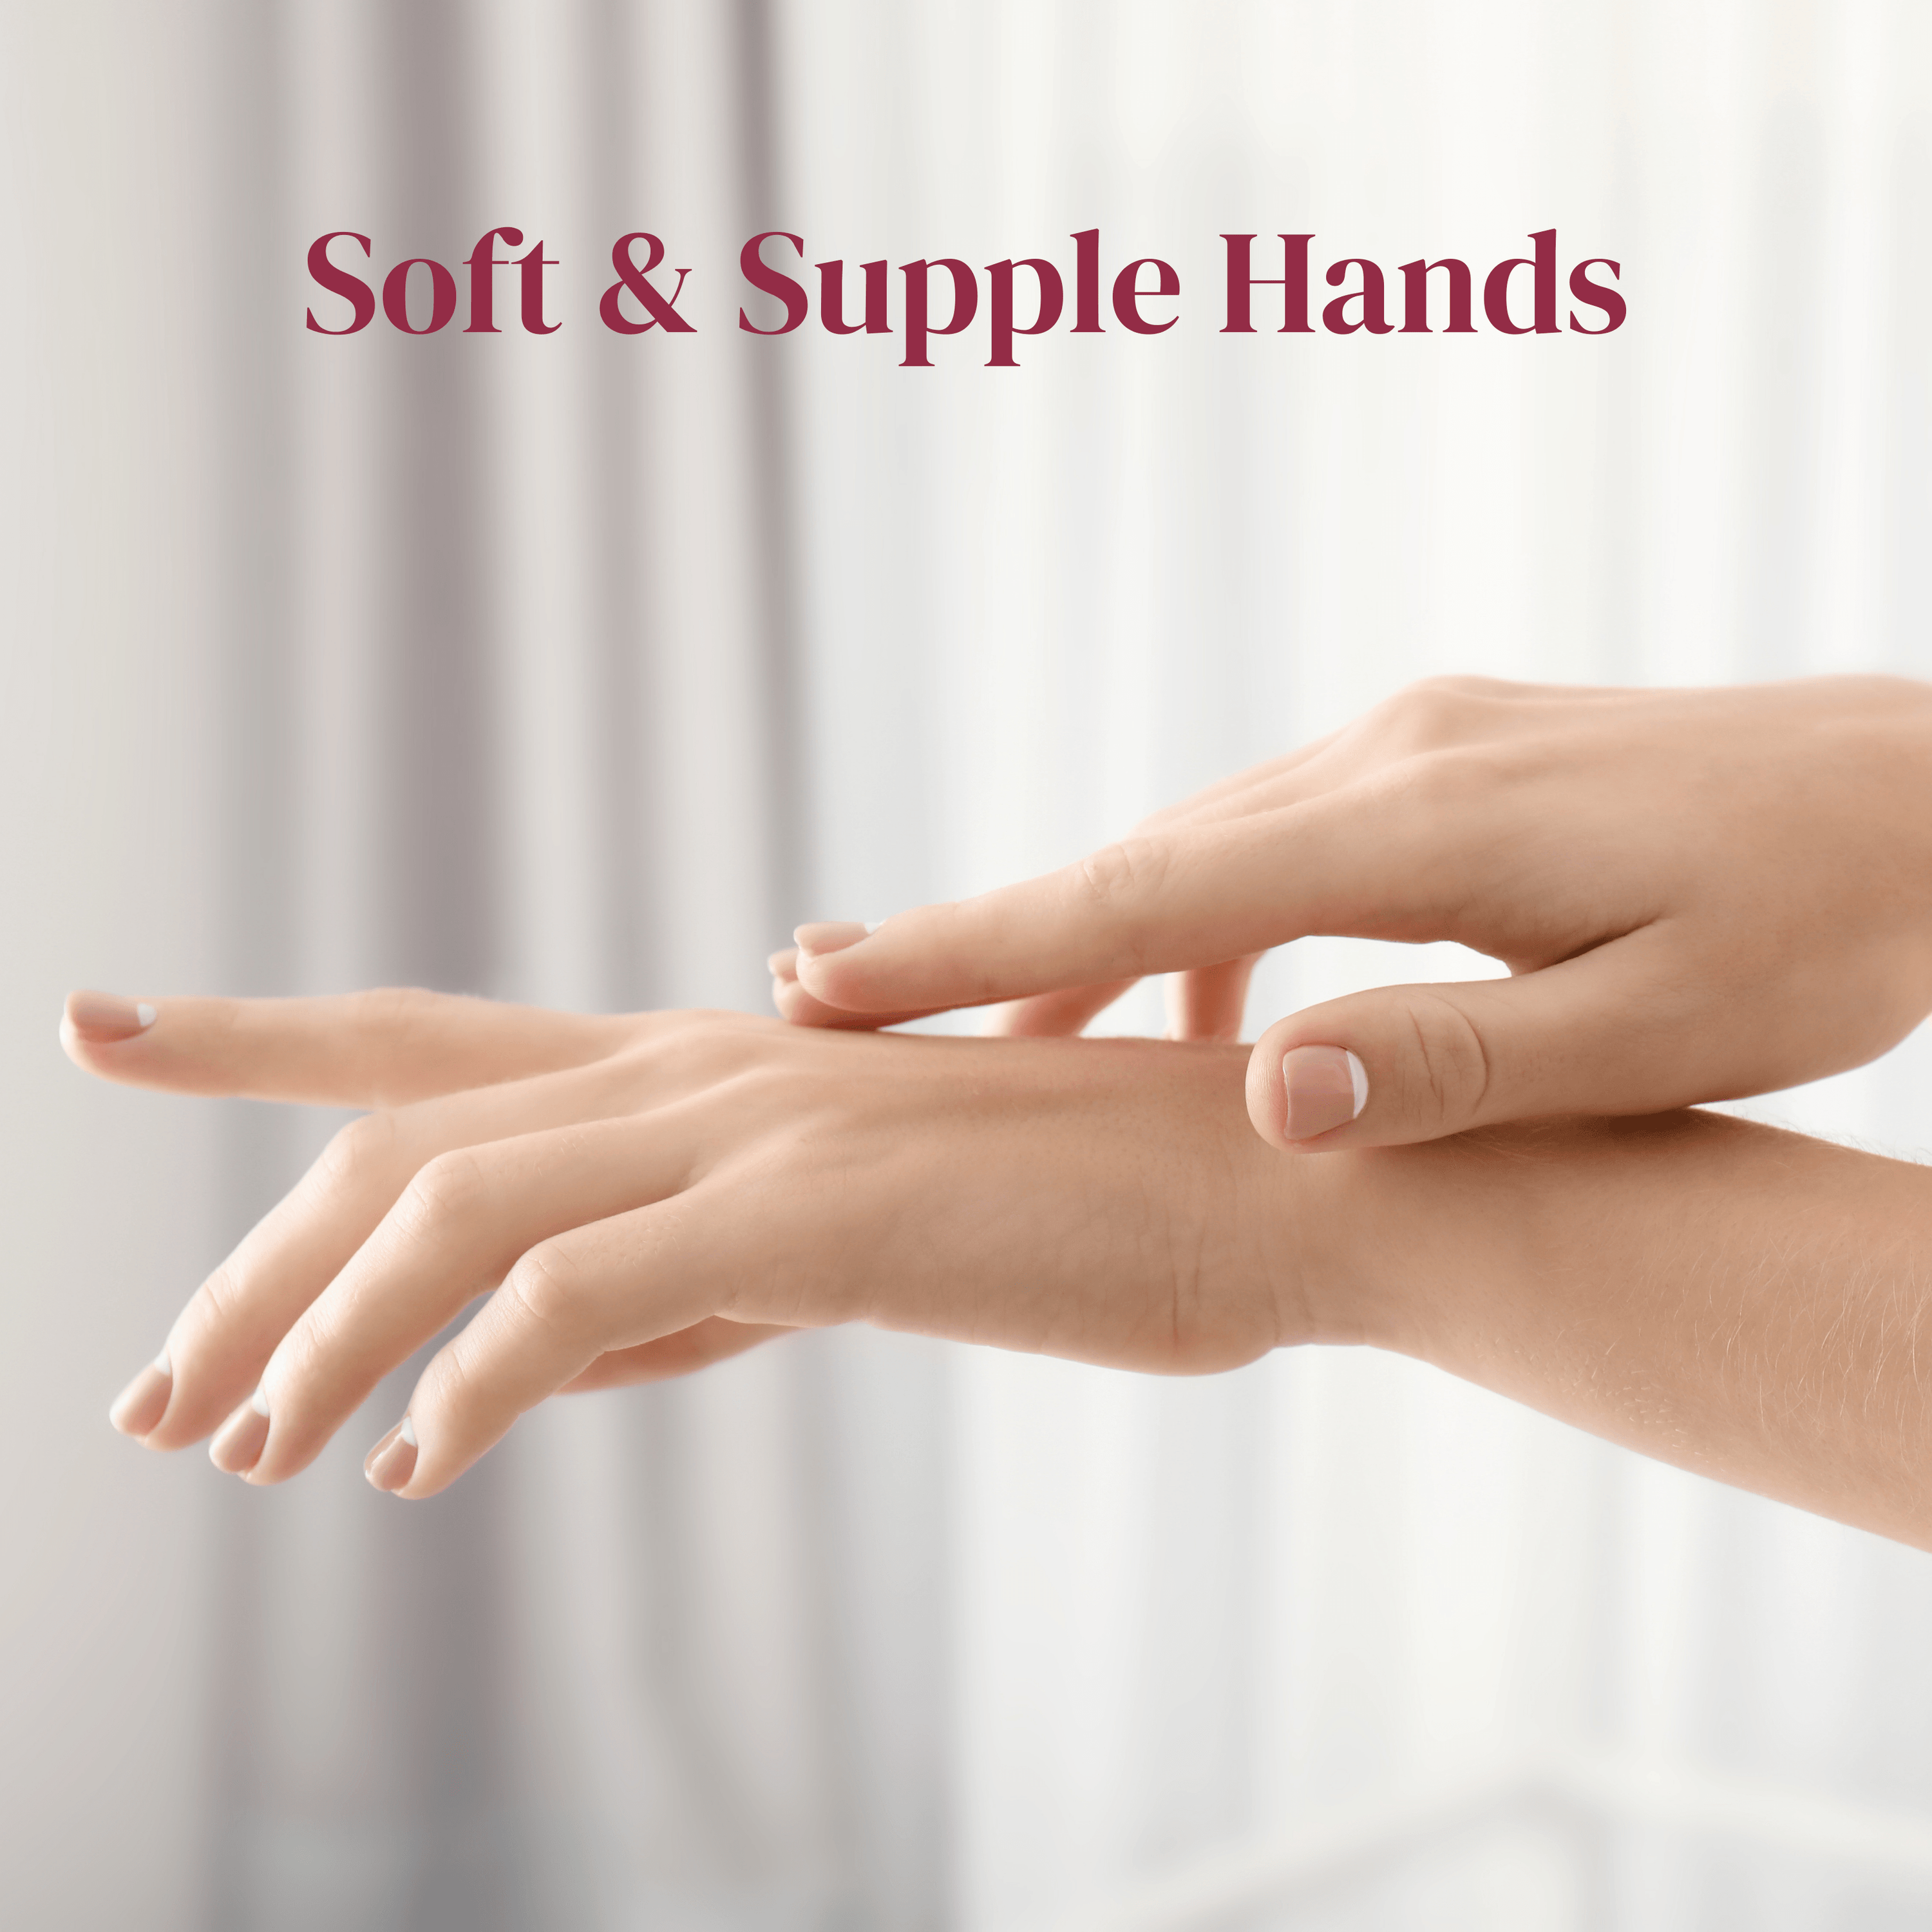 Say hello to Soft & Supple hands! - LuxaDerme